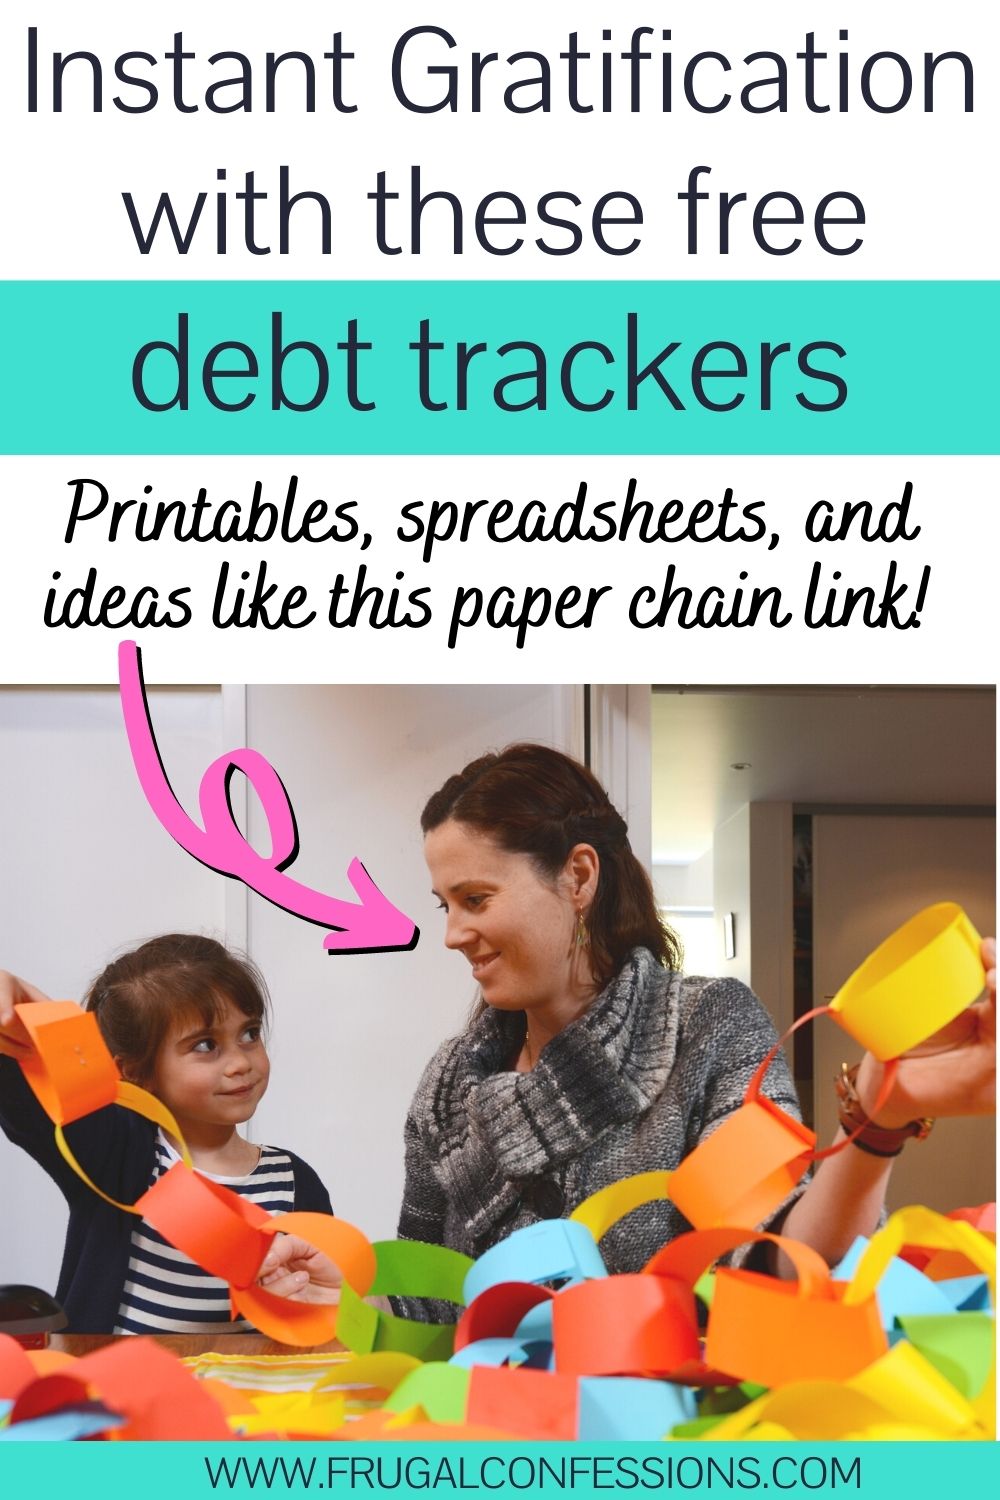 mother with daughter, making paper chain debt payoff visual, text overlay "instant gratification with these free debt trackers"